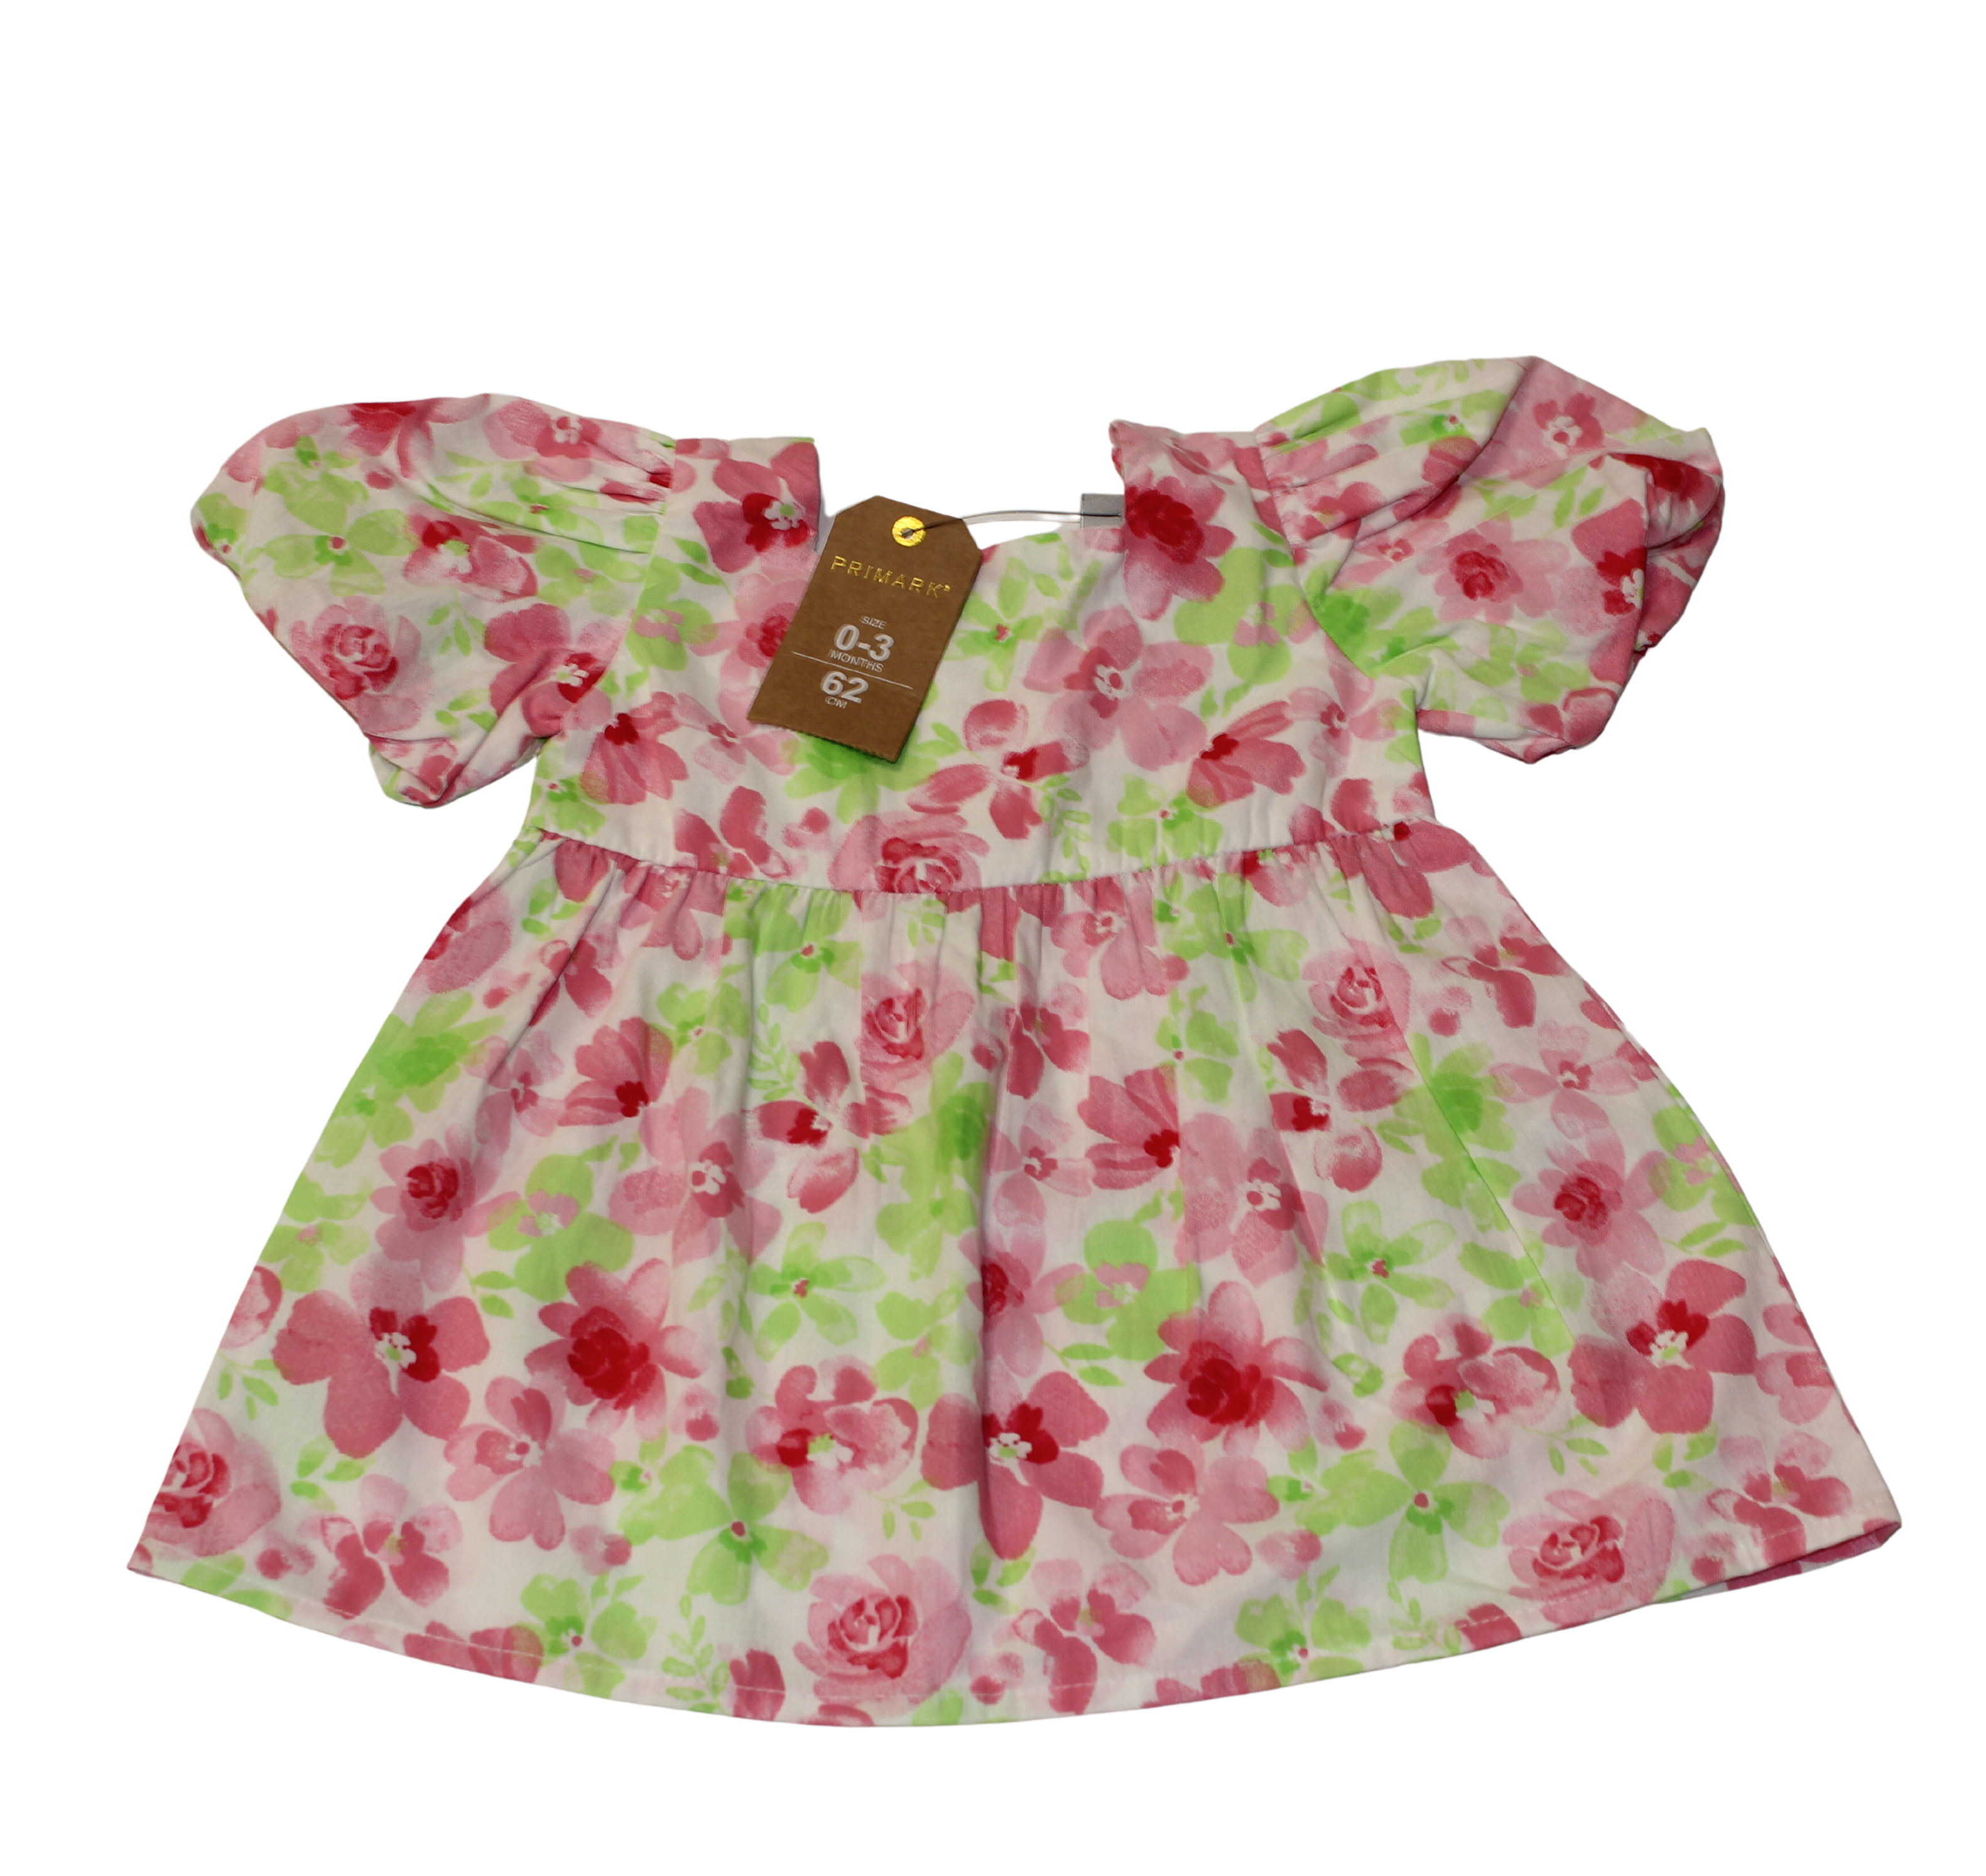 Greens and Pinks Floral Dress